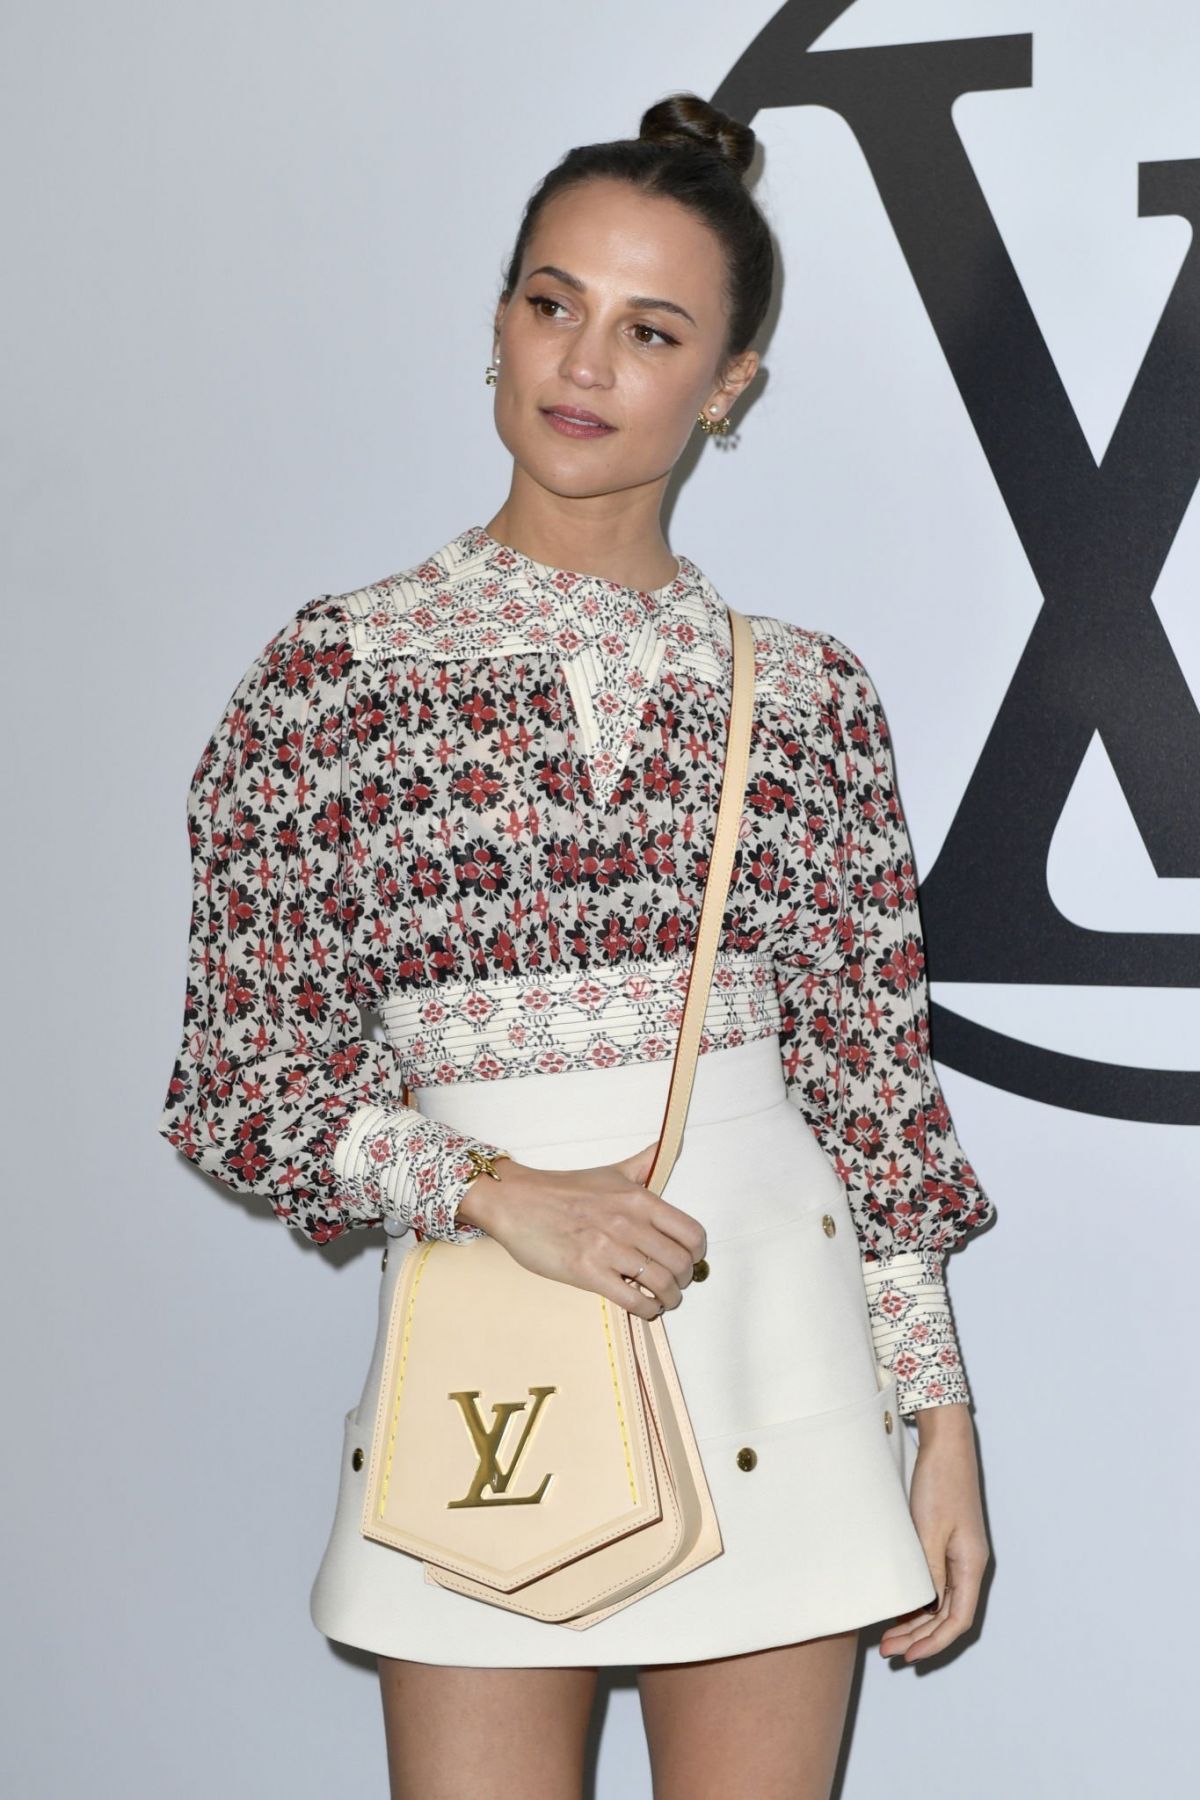 Alicia Vikander Online on X: More photos of Alicia Vikander outside the Louis  Vuitton show as part of the Paris Fashion Week Womenswear Fall/Winter 2020/ 2021 #AliciaVikander  / X